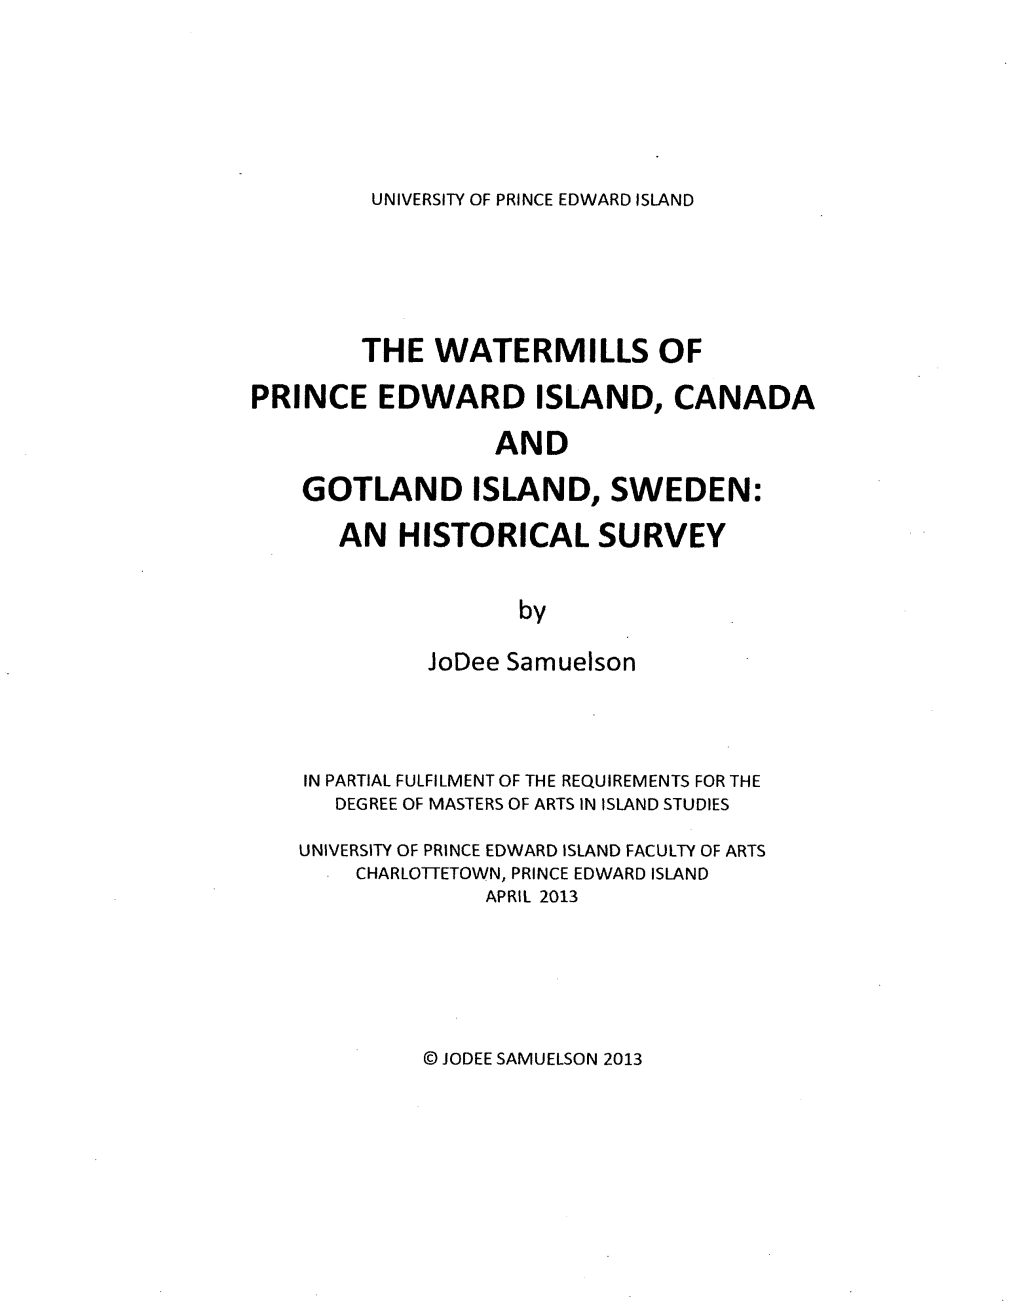 The Watermills of Prince Edward Island, Canada and Gotland Island, Sweden: an Historical Survey